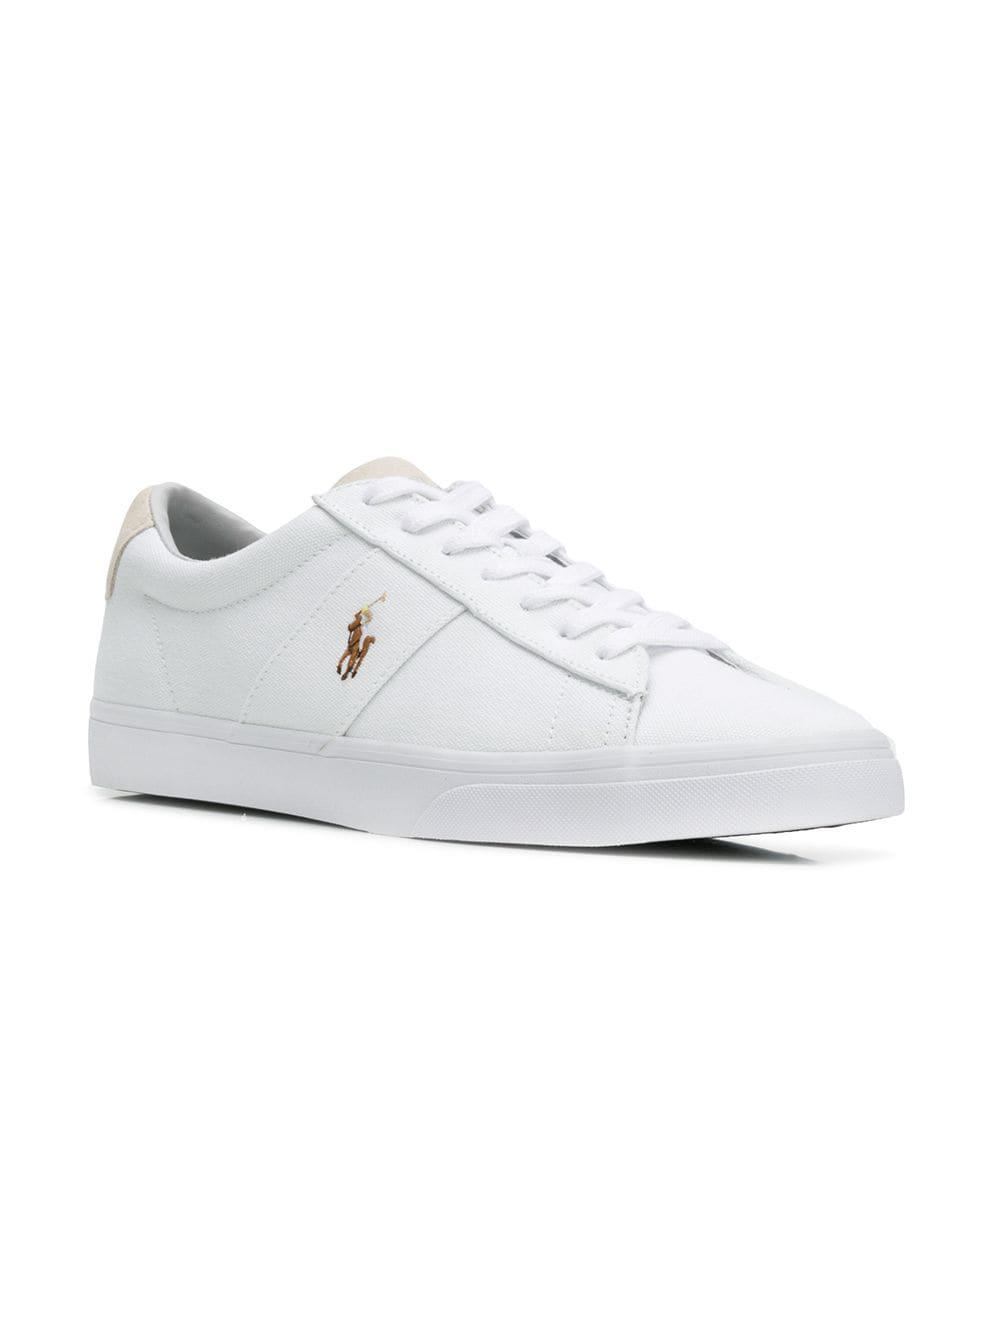 Polo Ralph Lauren Sayer Canvas Low Top Trainers in White for Men - Save 12%  | Lyst